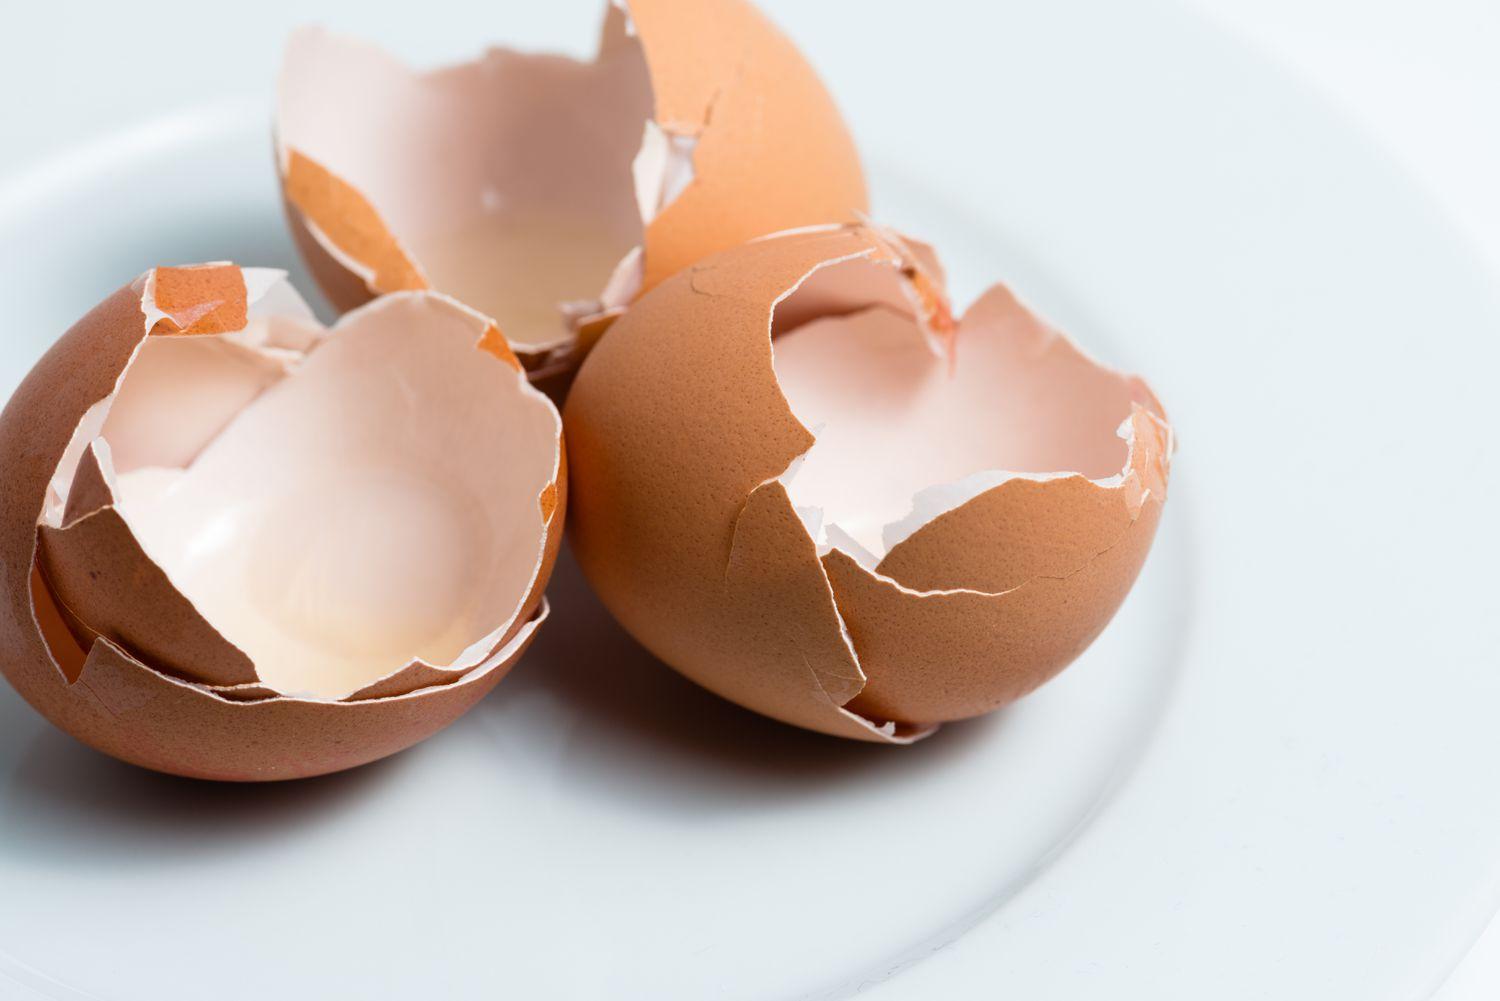 Transforming Eggshells into Calcium Pills: A Sustainable Solution for Waste Reduction